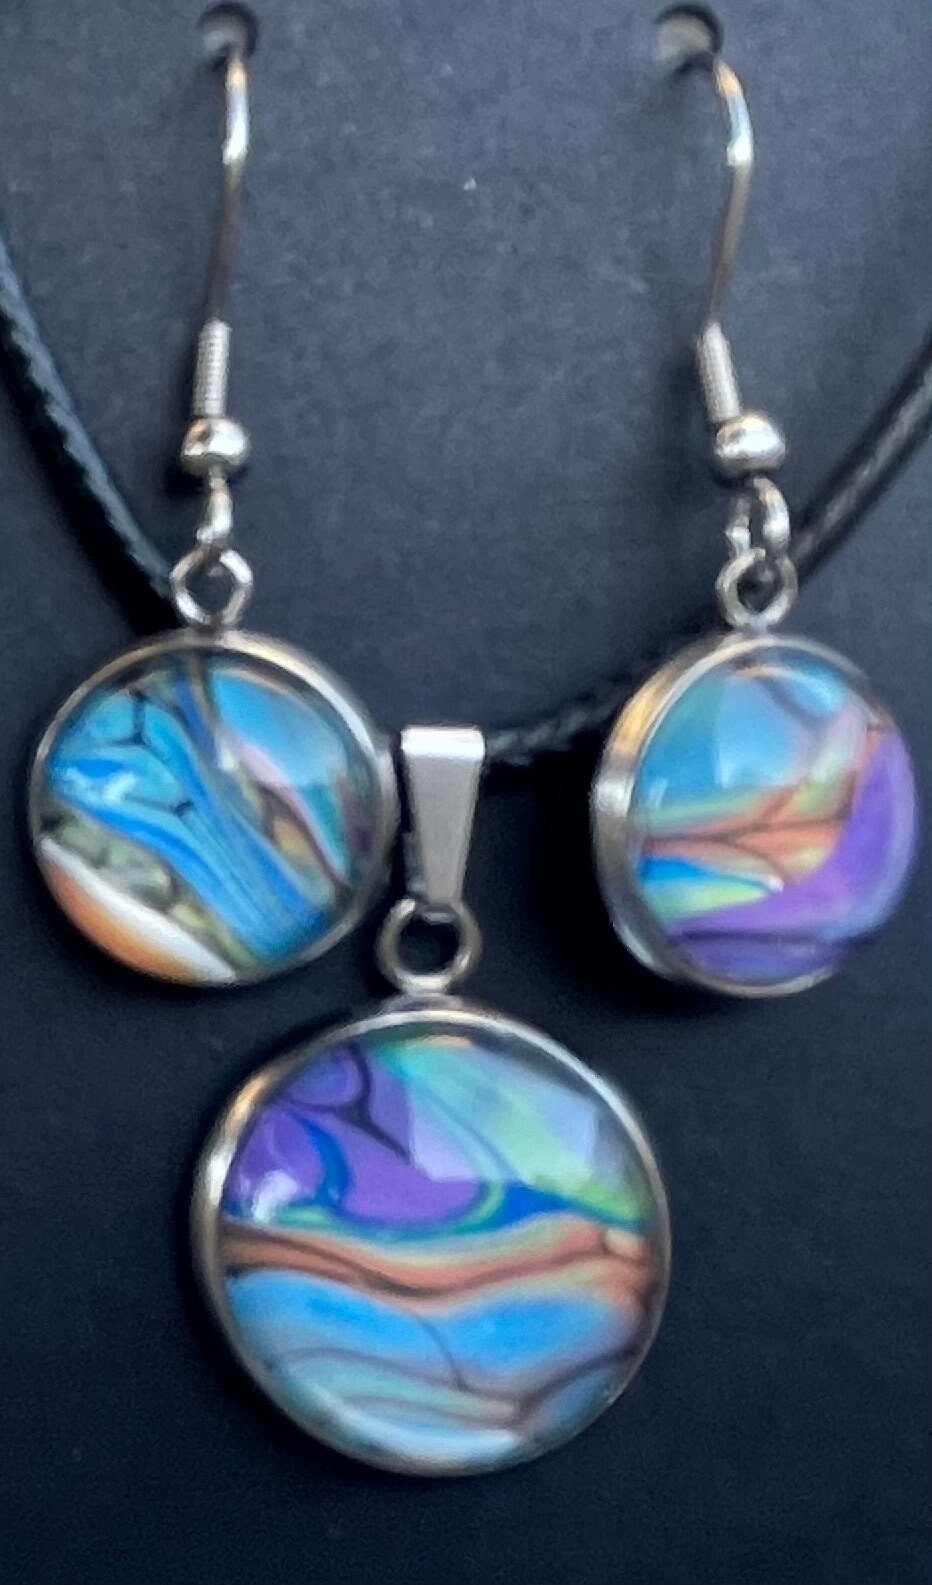 Handmade pendant necklace and dangle earrings, jewelry set in multi-colored acrylic art pour